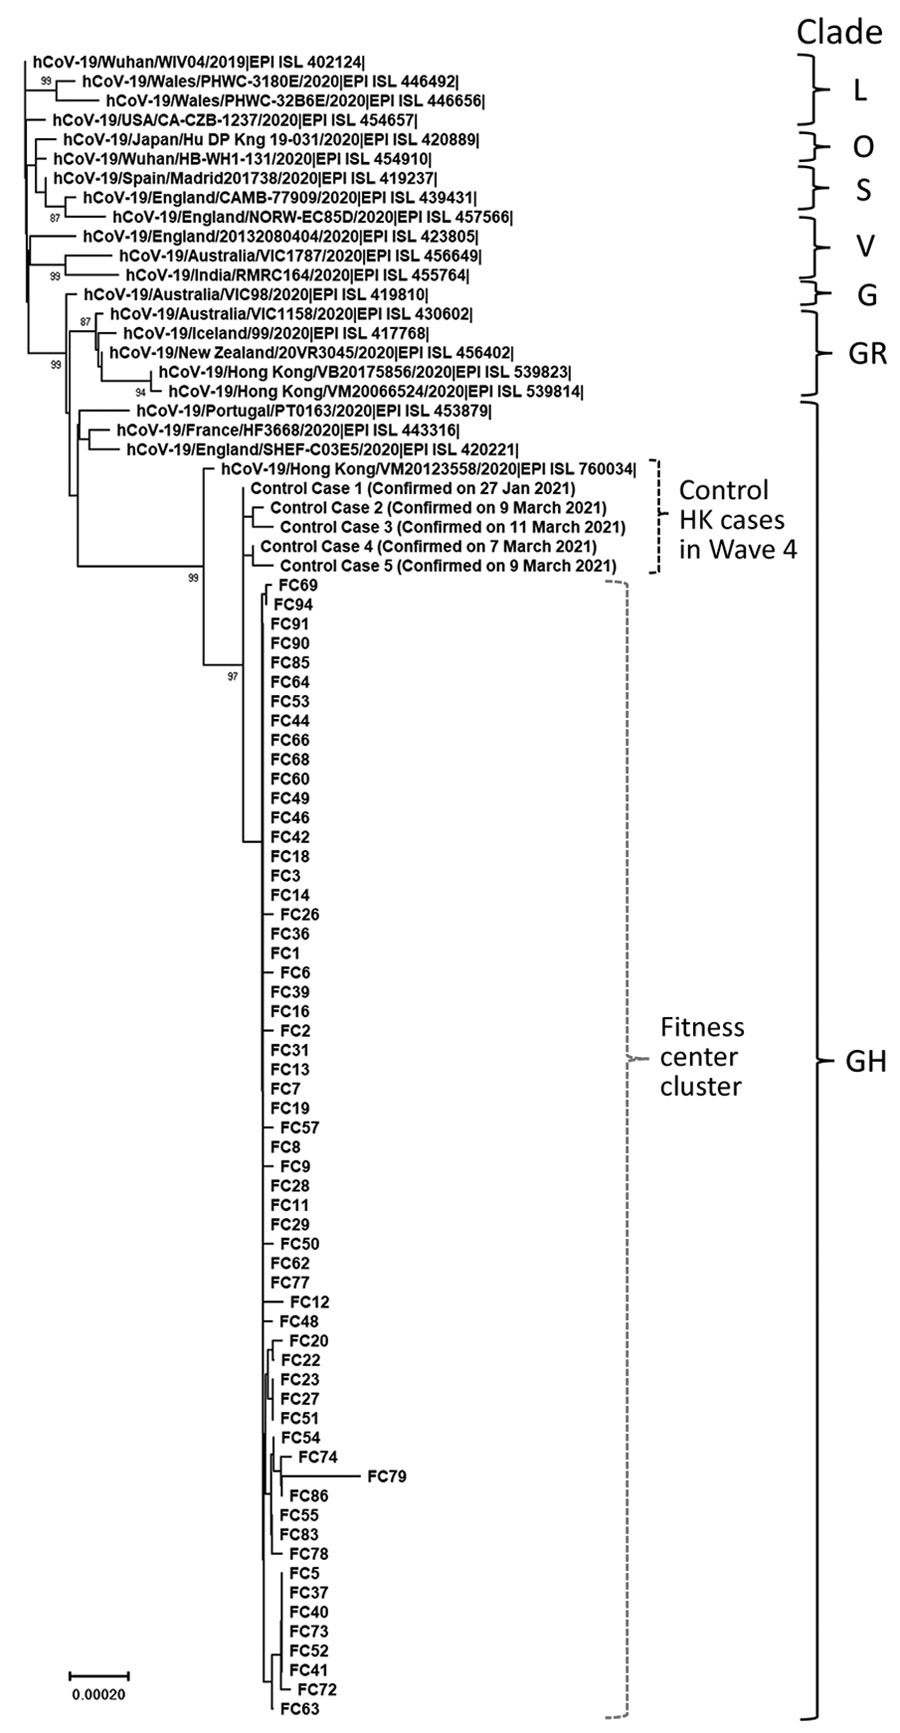 Phylogenetic tree of the severe acute respiratory syndrome coronavirus 2 (SARS-CoV-2) viruses detected in a fitness club in Hong Kong, China, in March 2021. Viruses from clades L, S, V, G, GH, GR, and O (others) are also included in the analysis. Near full-length genomes of studied samples were deduced by a previously described Illumina (https://www.illumina.com) sequencing protocol (sequence coverage >100) (1,4). Human SARS-CoV-2 WIV04 is selected to be the root of this phylogenetic tree. The tree was constructed by using the neighbor-joining method. Only bootstrap values >80 are shown. EPI ISL accession nos. for sequences retrieved in GISAID (https://www.gisaid.org) are provided. Scale bar indicates estimated genetic distance.